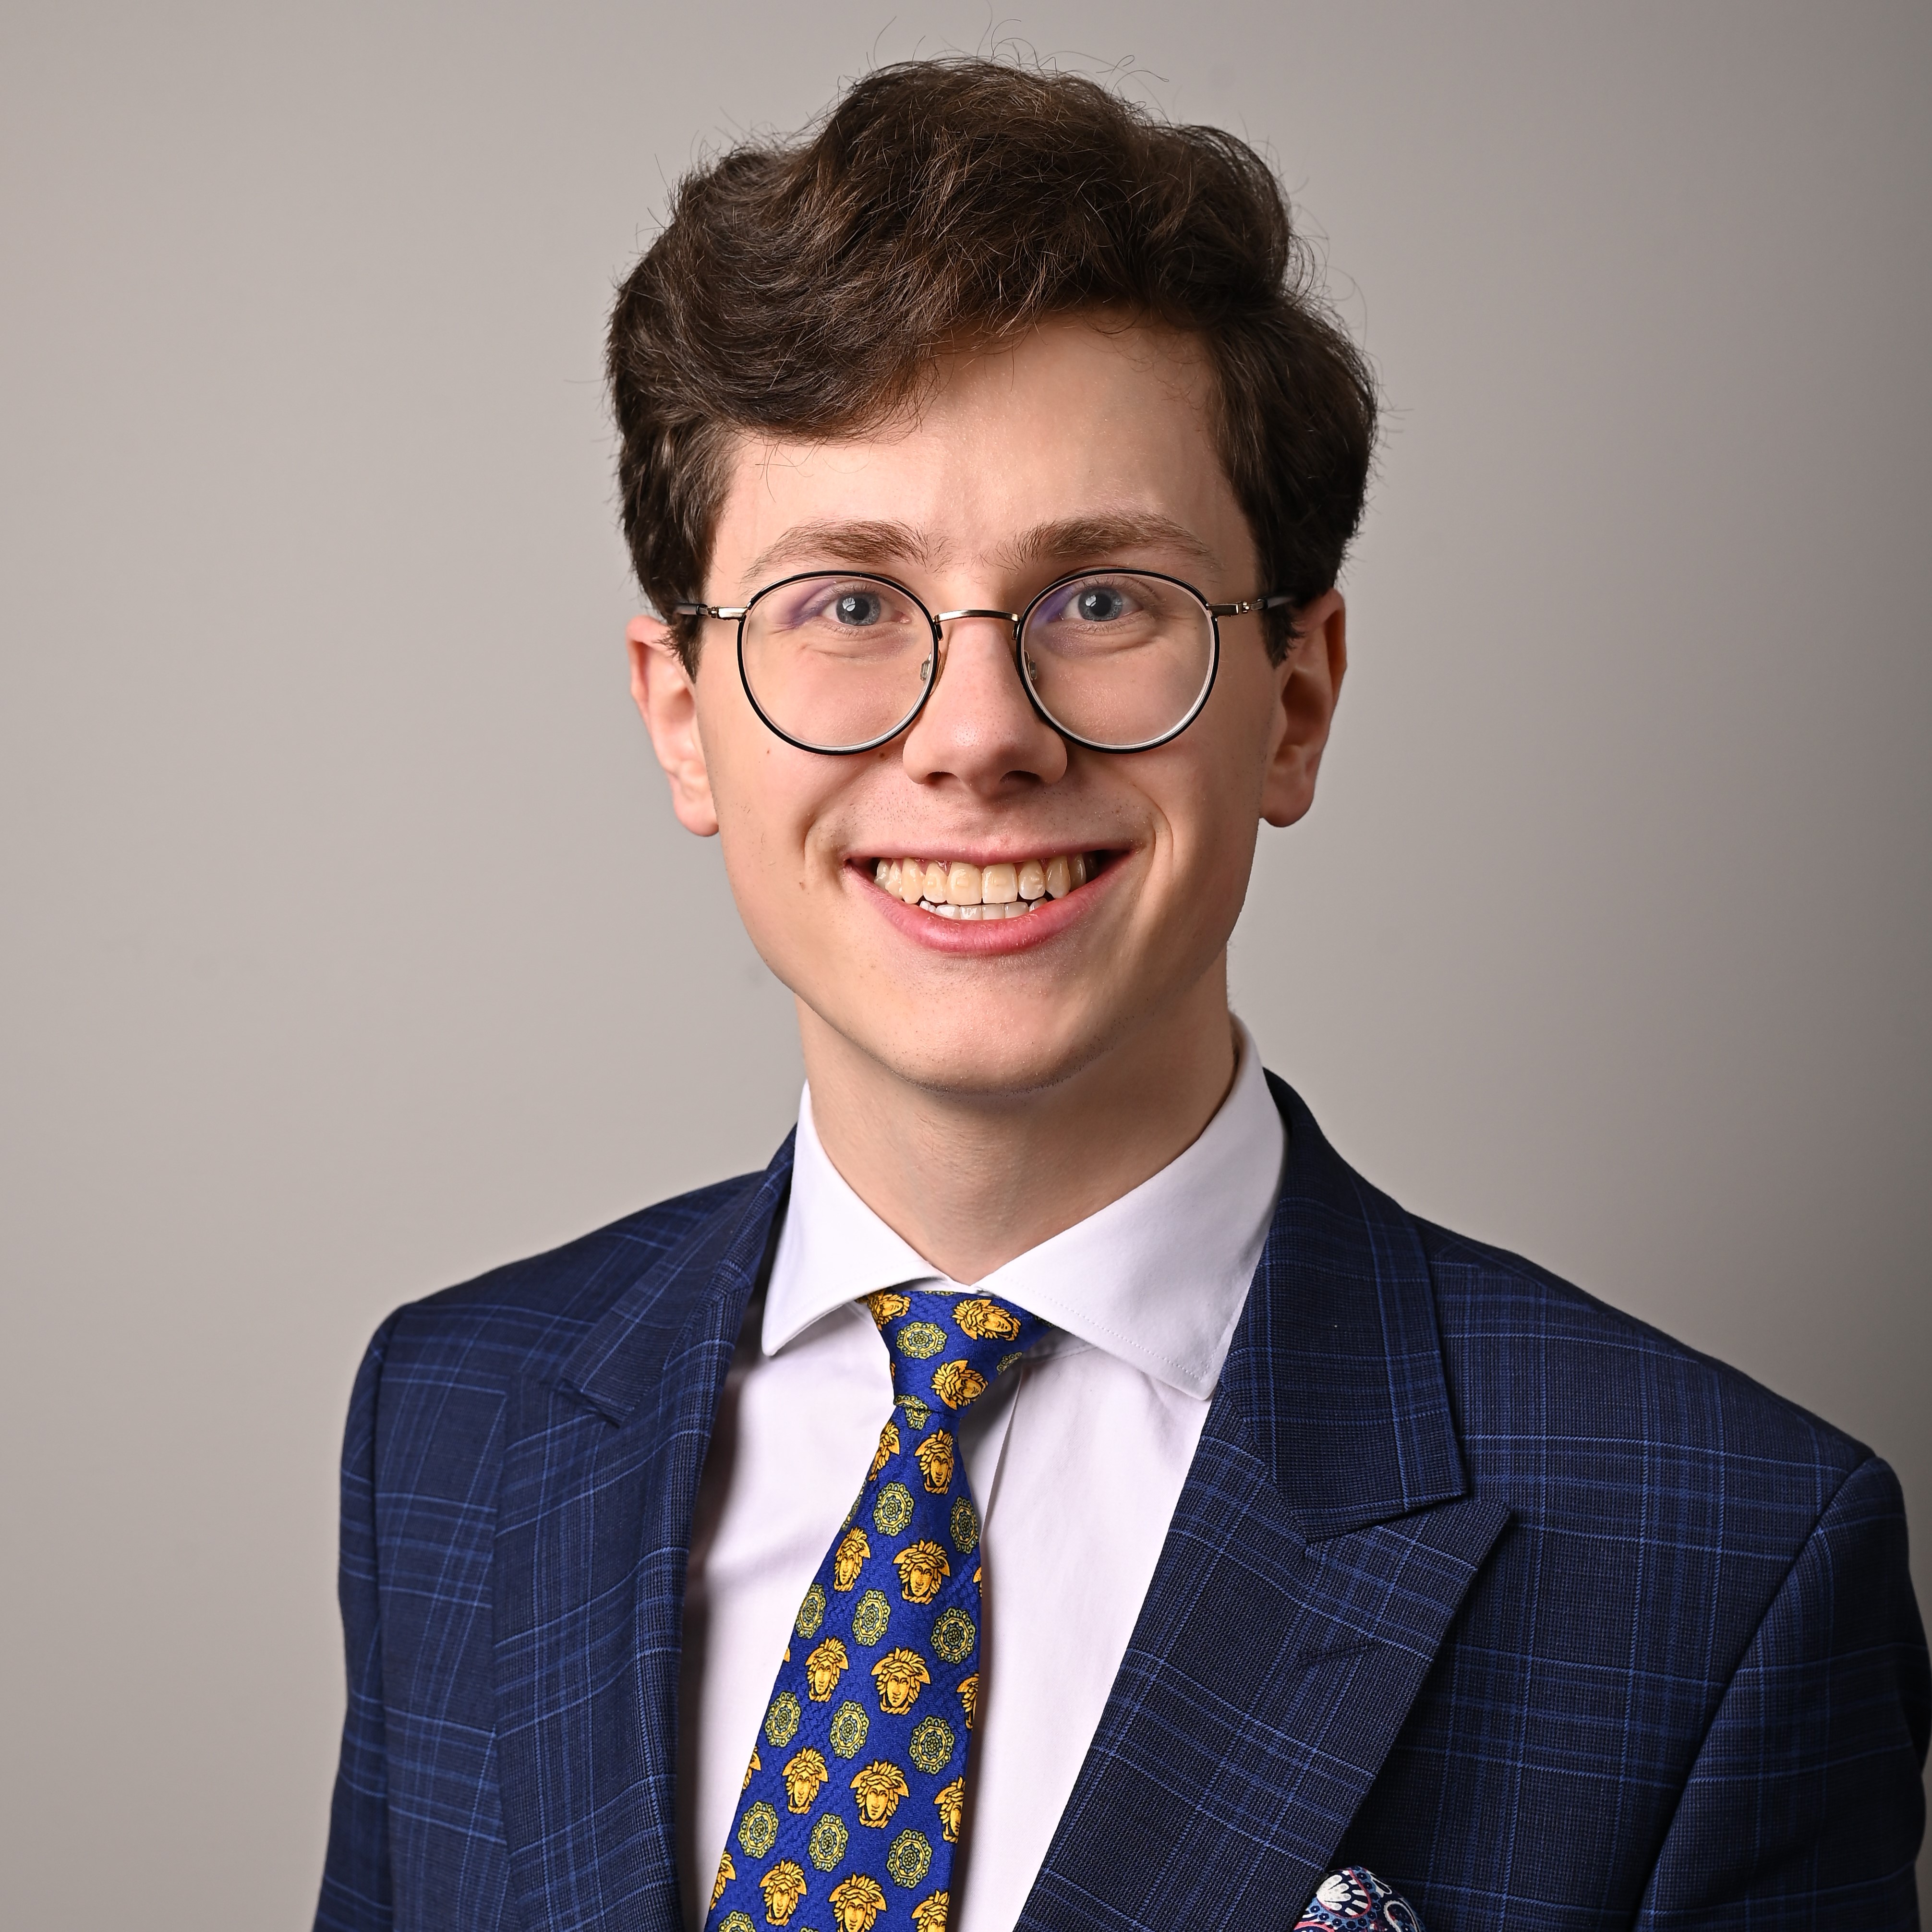 Shows Man is a suit wearing glasses 